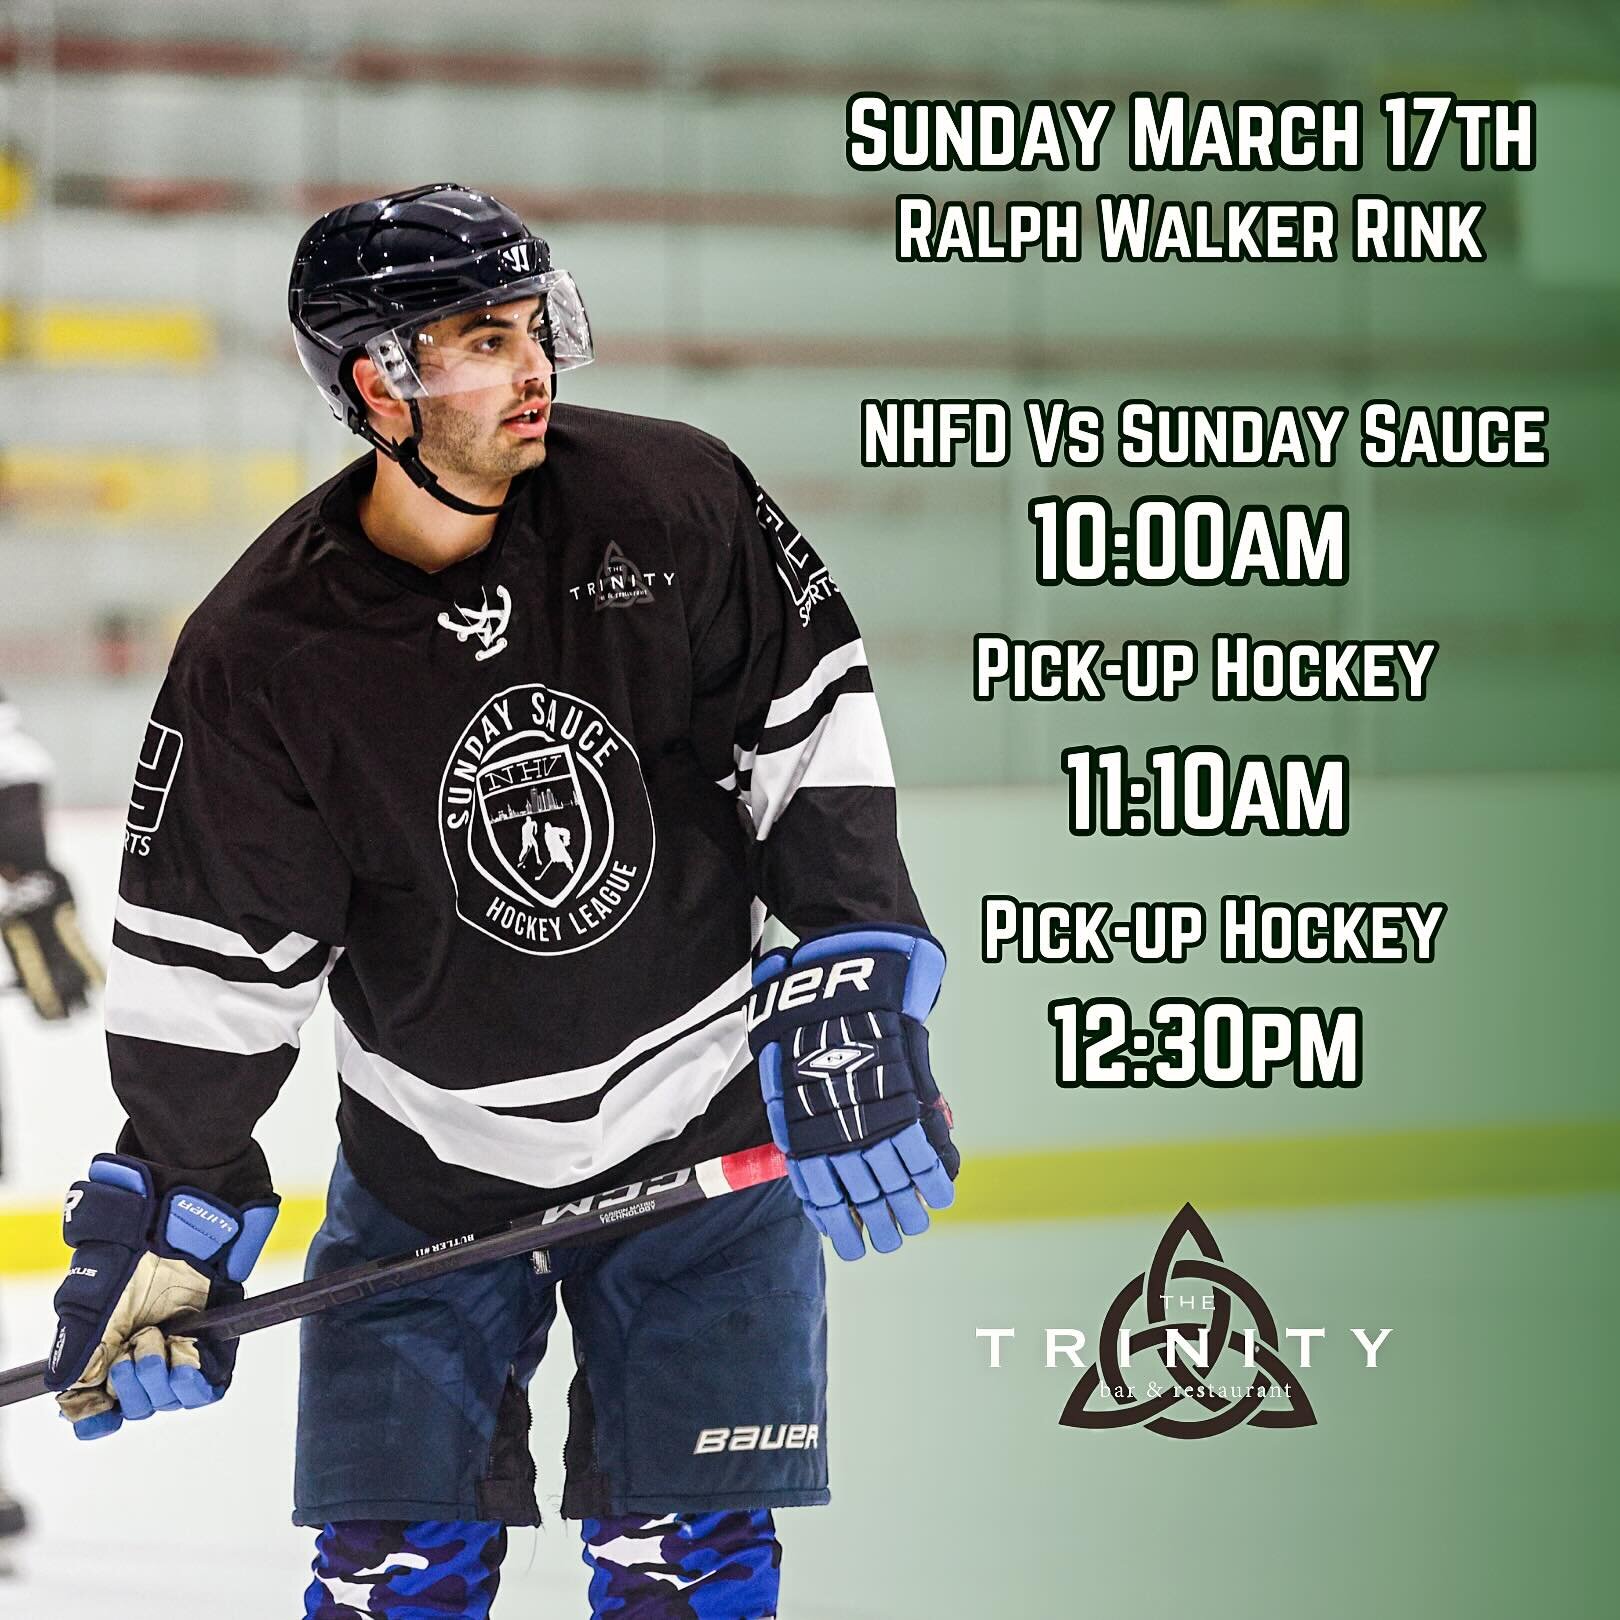 Another full slate of Sunday Sauce Hockey! Featuring a tune up scrimmage with the New Haven Fire Dept in prep for the 2024 Chief&rsquo;s Cup and two pick-up skates. Come on down to the Trinity Bar after to enjoy a pint and some Irish fare with your f